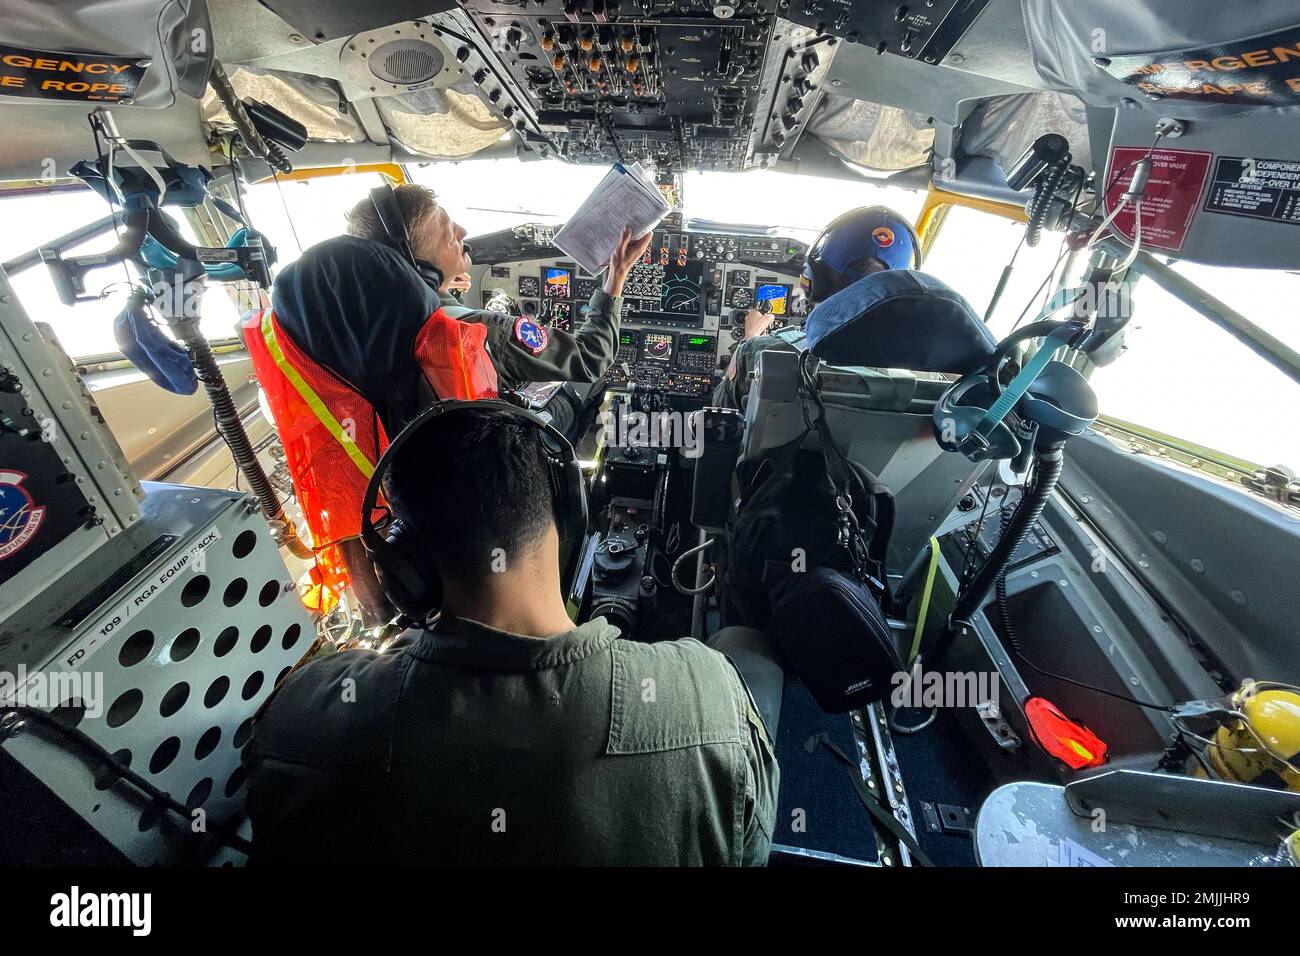 U.S. Air Force Capt. Brian Klazura, (left) a KC-135 pilot from the 93rd Air Refueling Wing, Capt. Edison Mulan (right), KC-135 copilot from the 93rd Air Refueling Wing, and SrA Benny Trevizo, boom operator from the 92nd Air Refueling Wing KC-135s prepare to air refuel with U.S. Air Force F-16 Fighting Falcons from the South Carolina Air National Guard, 157th Fighter Wing during Relampago VII, an exercise in Barranquilla, Colombia, Aug. 30, 2022. The purpose of this exercise is to provide the Colombian Air Force with requested realistic interoperability training as allied countries, under NATO Stock Photo